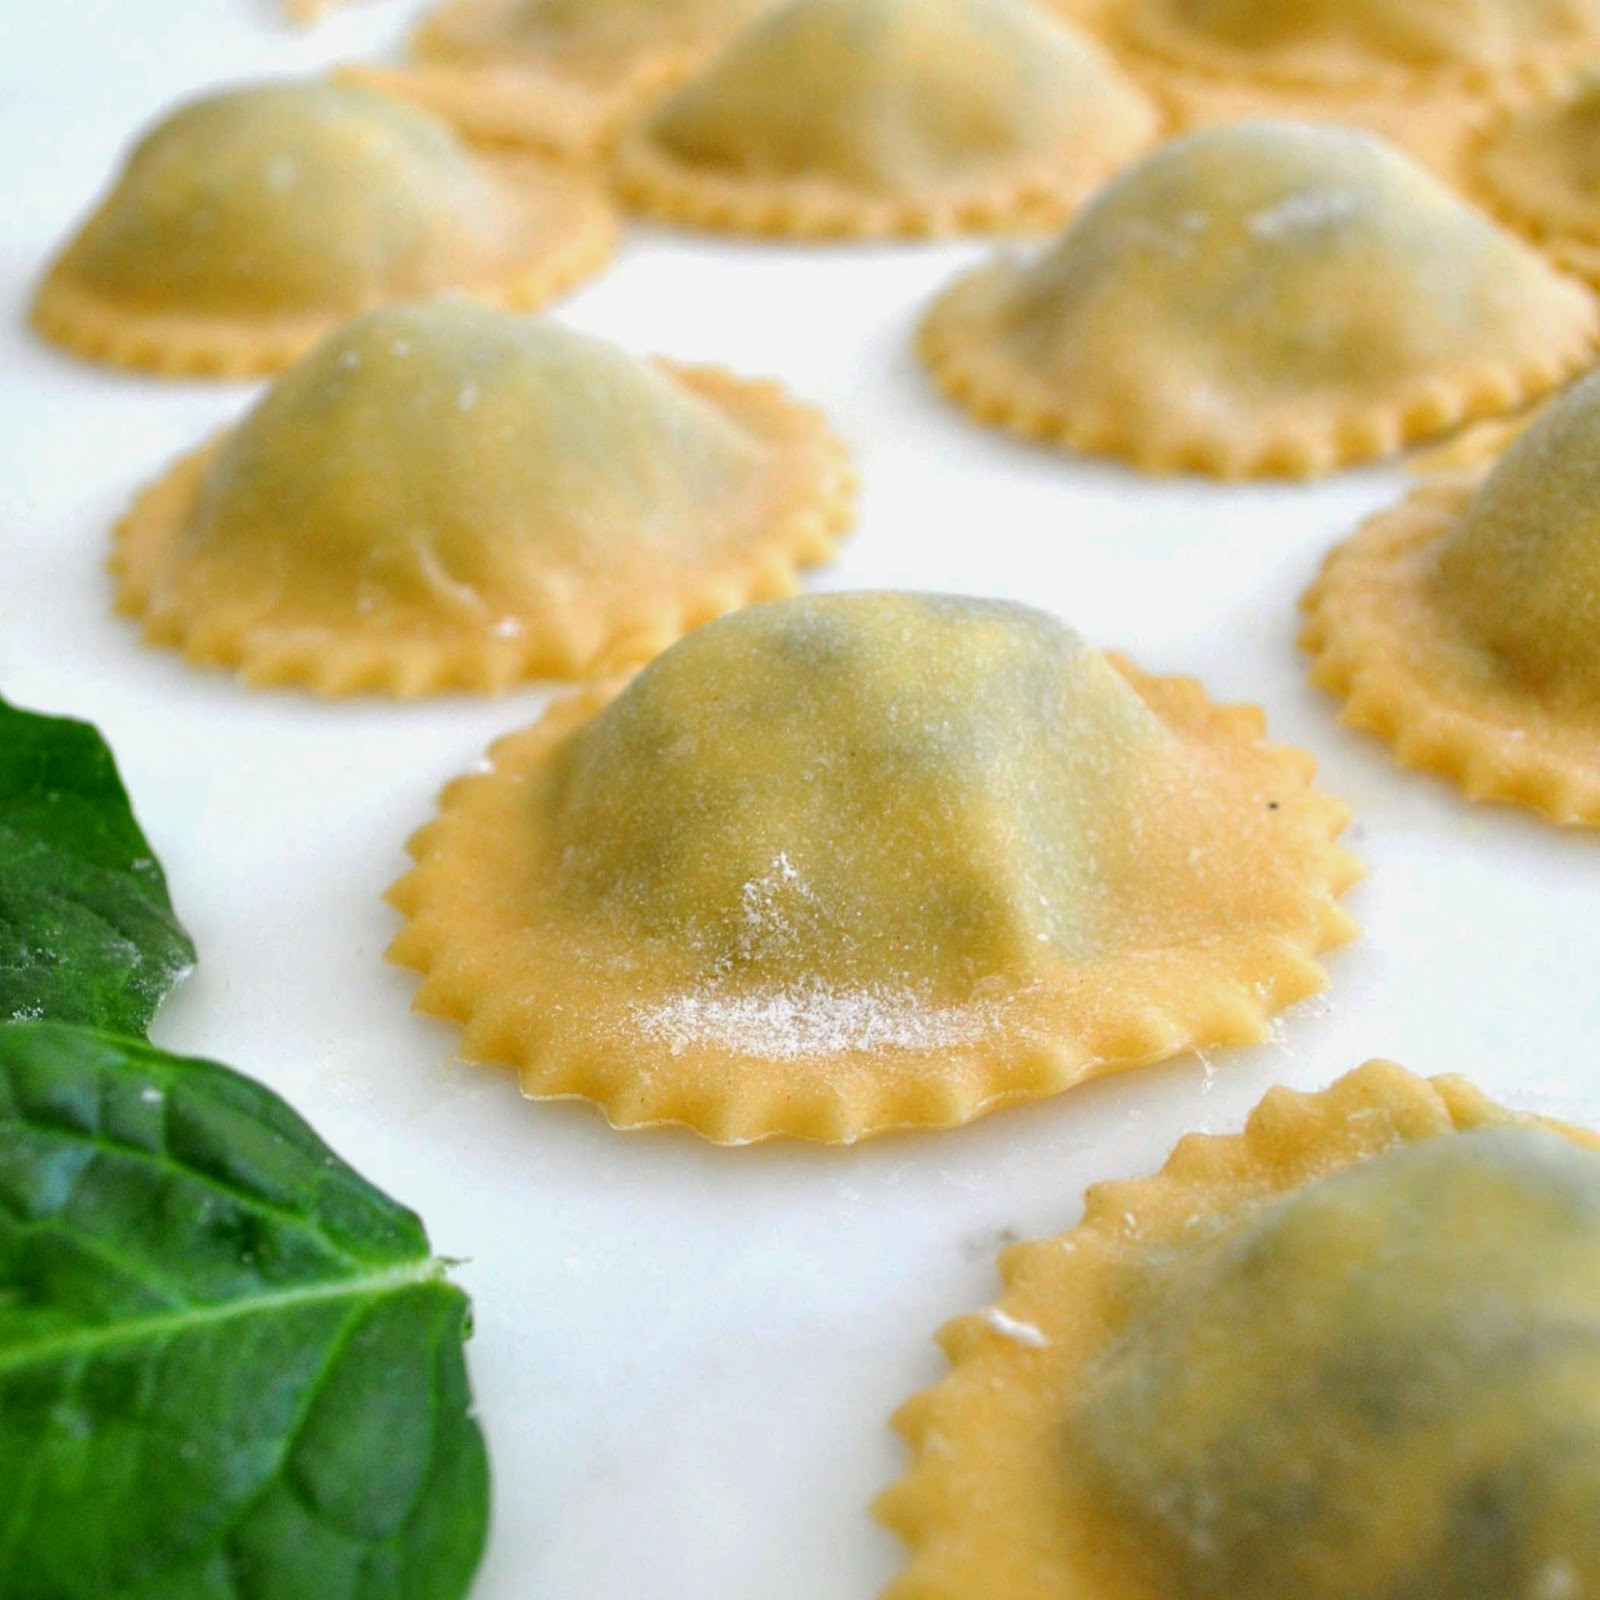 Cooking with Manuela: Homemade Ravioli with Spinach and Ricotta Cheese